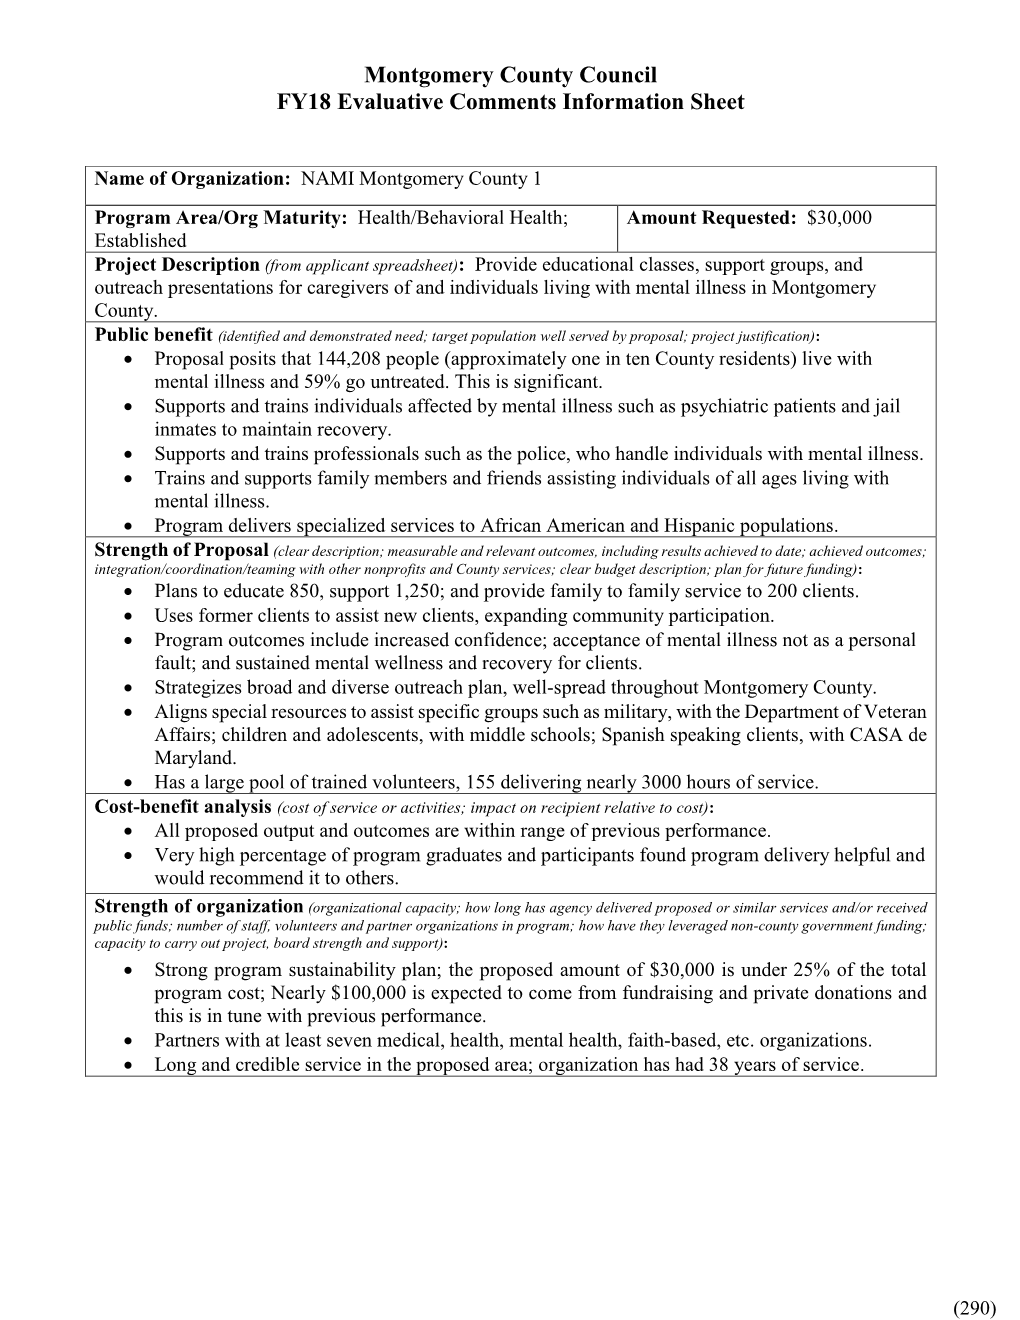 Montgomery County Council FY18 Evaluative Comments Information Sheet